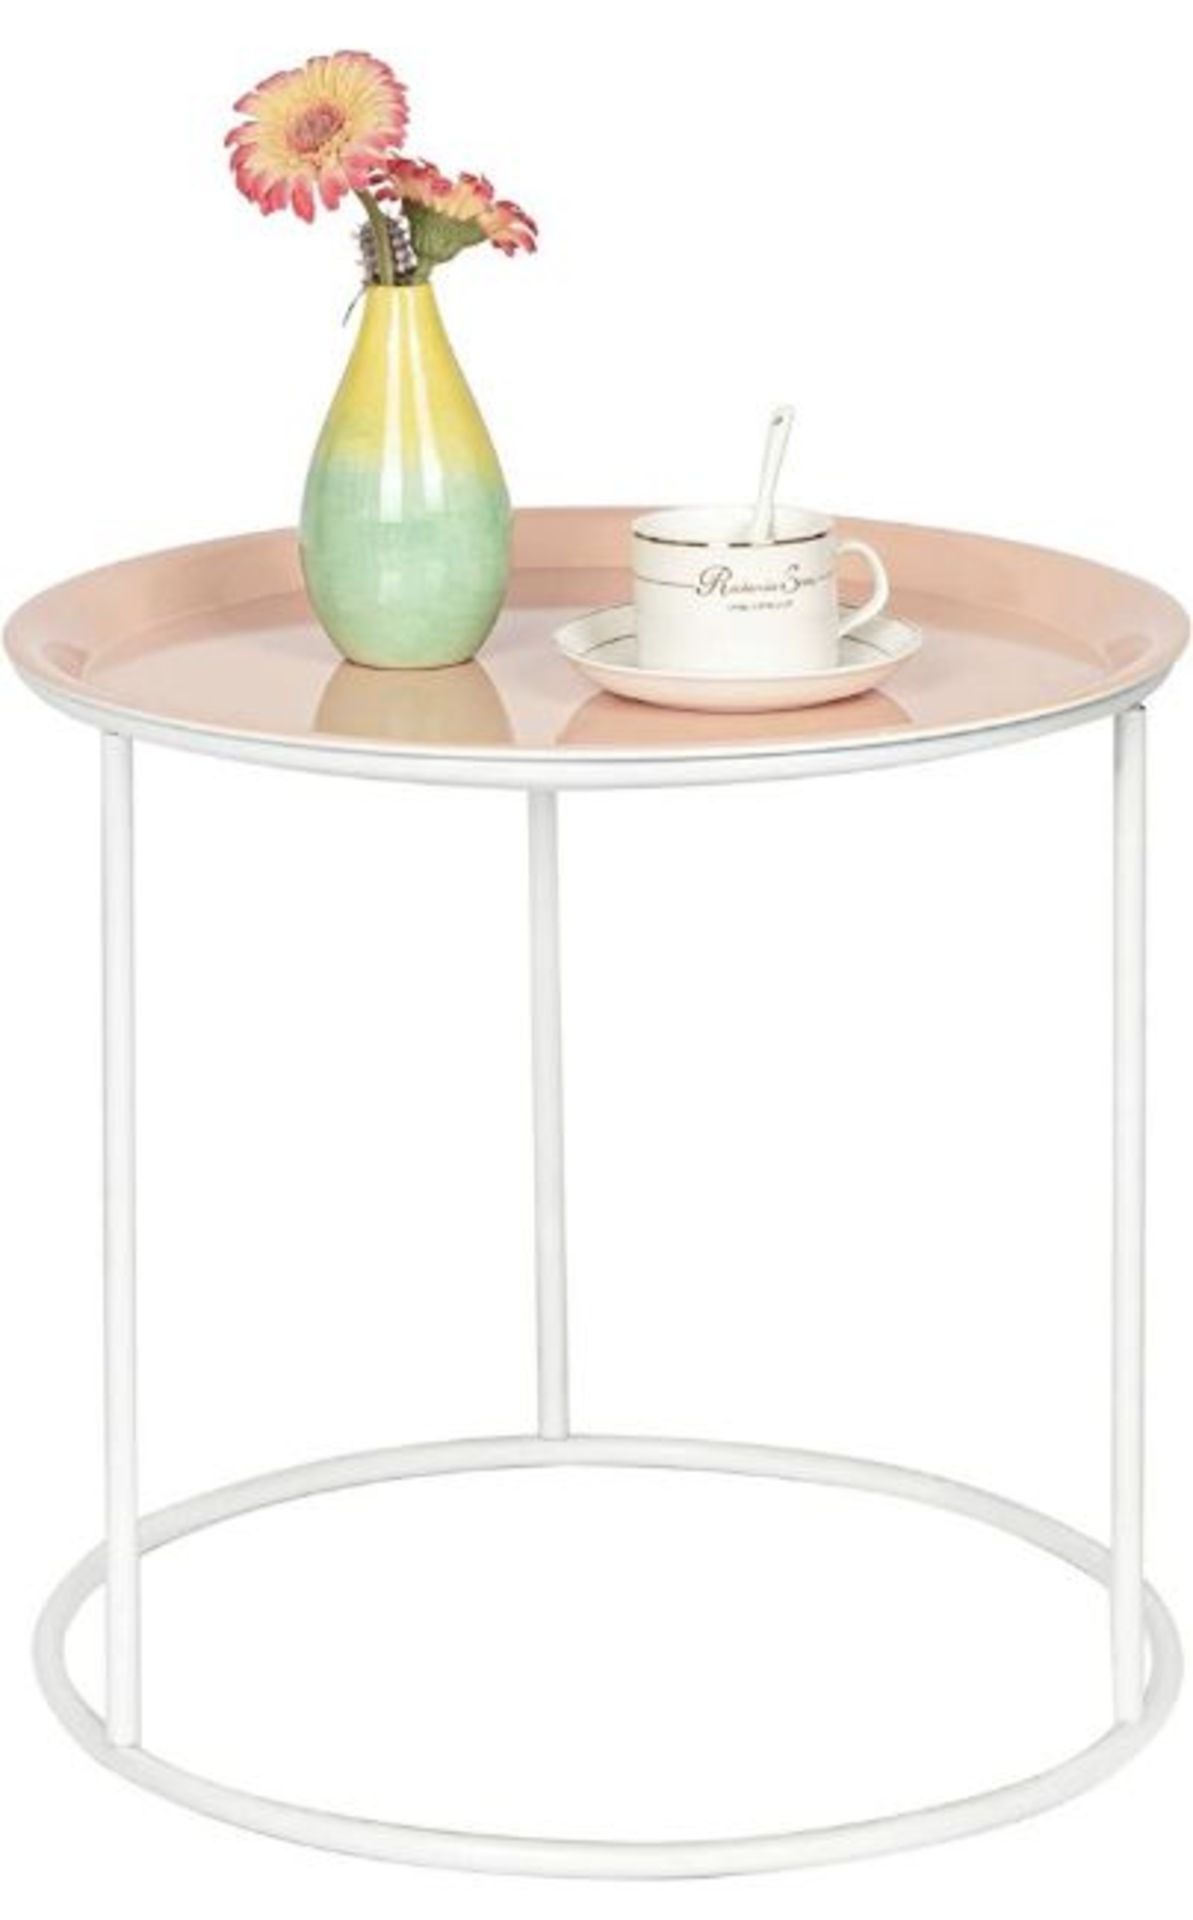 Topfly Round Metal Side Table with Detachable Tray, Coral & White RRP £19.99